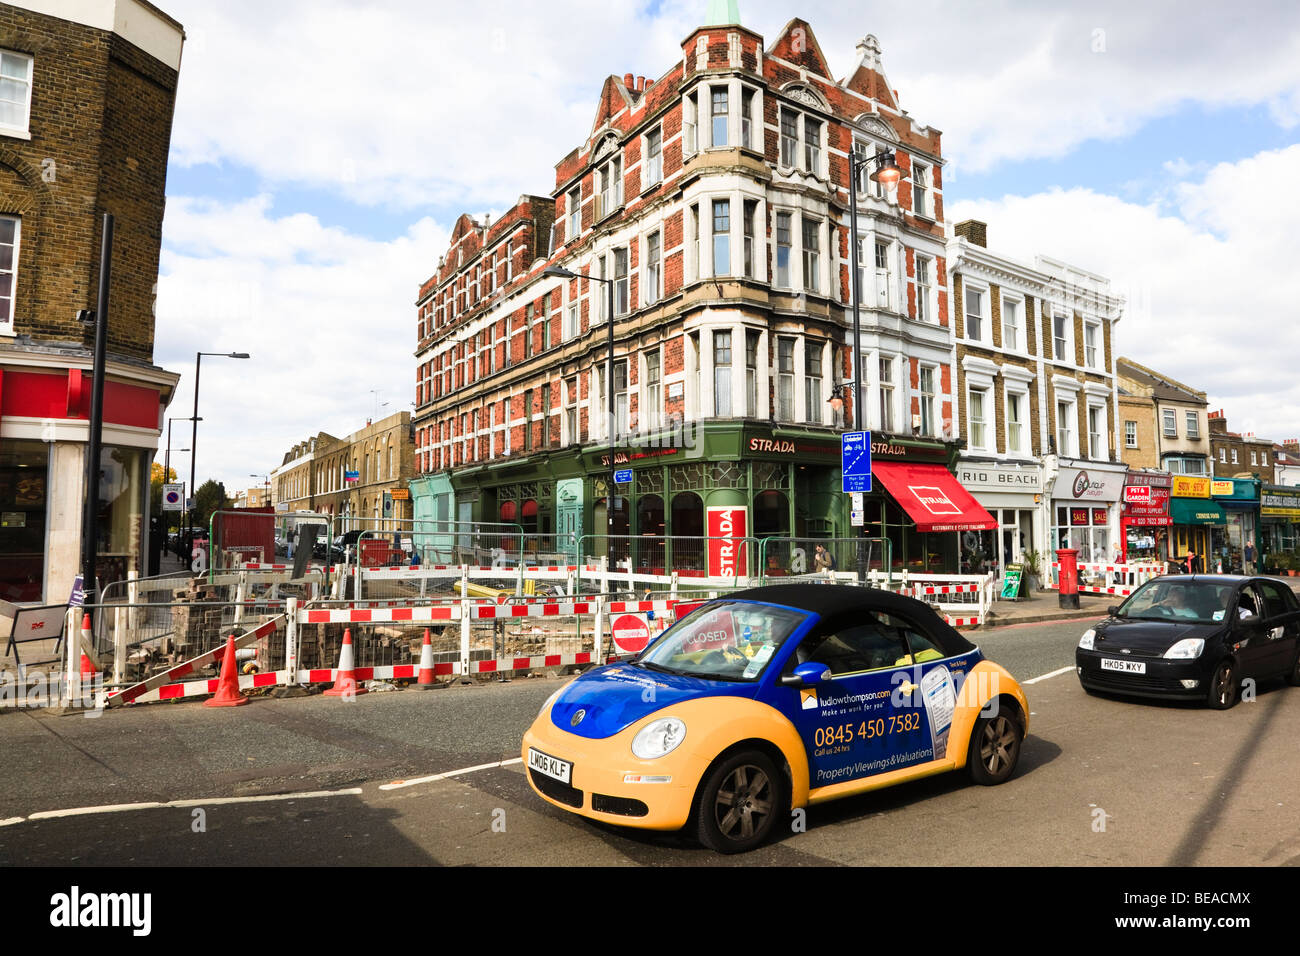 Yellow and Blue Volkswagen car in Clapham High Street, advertising an Estate agency, London, Uk Stock Photo